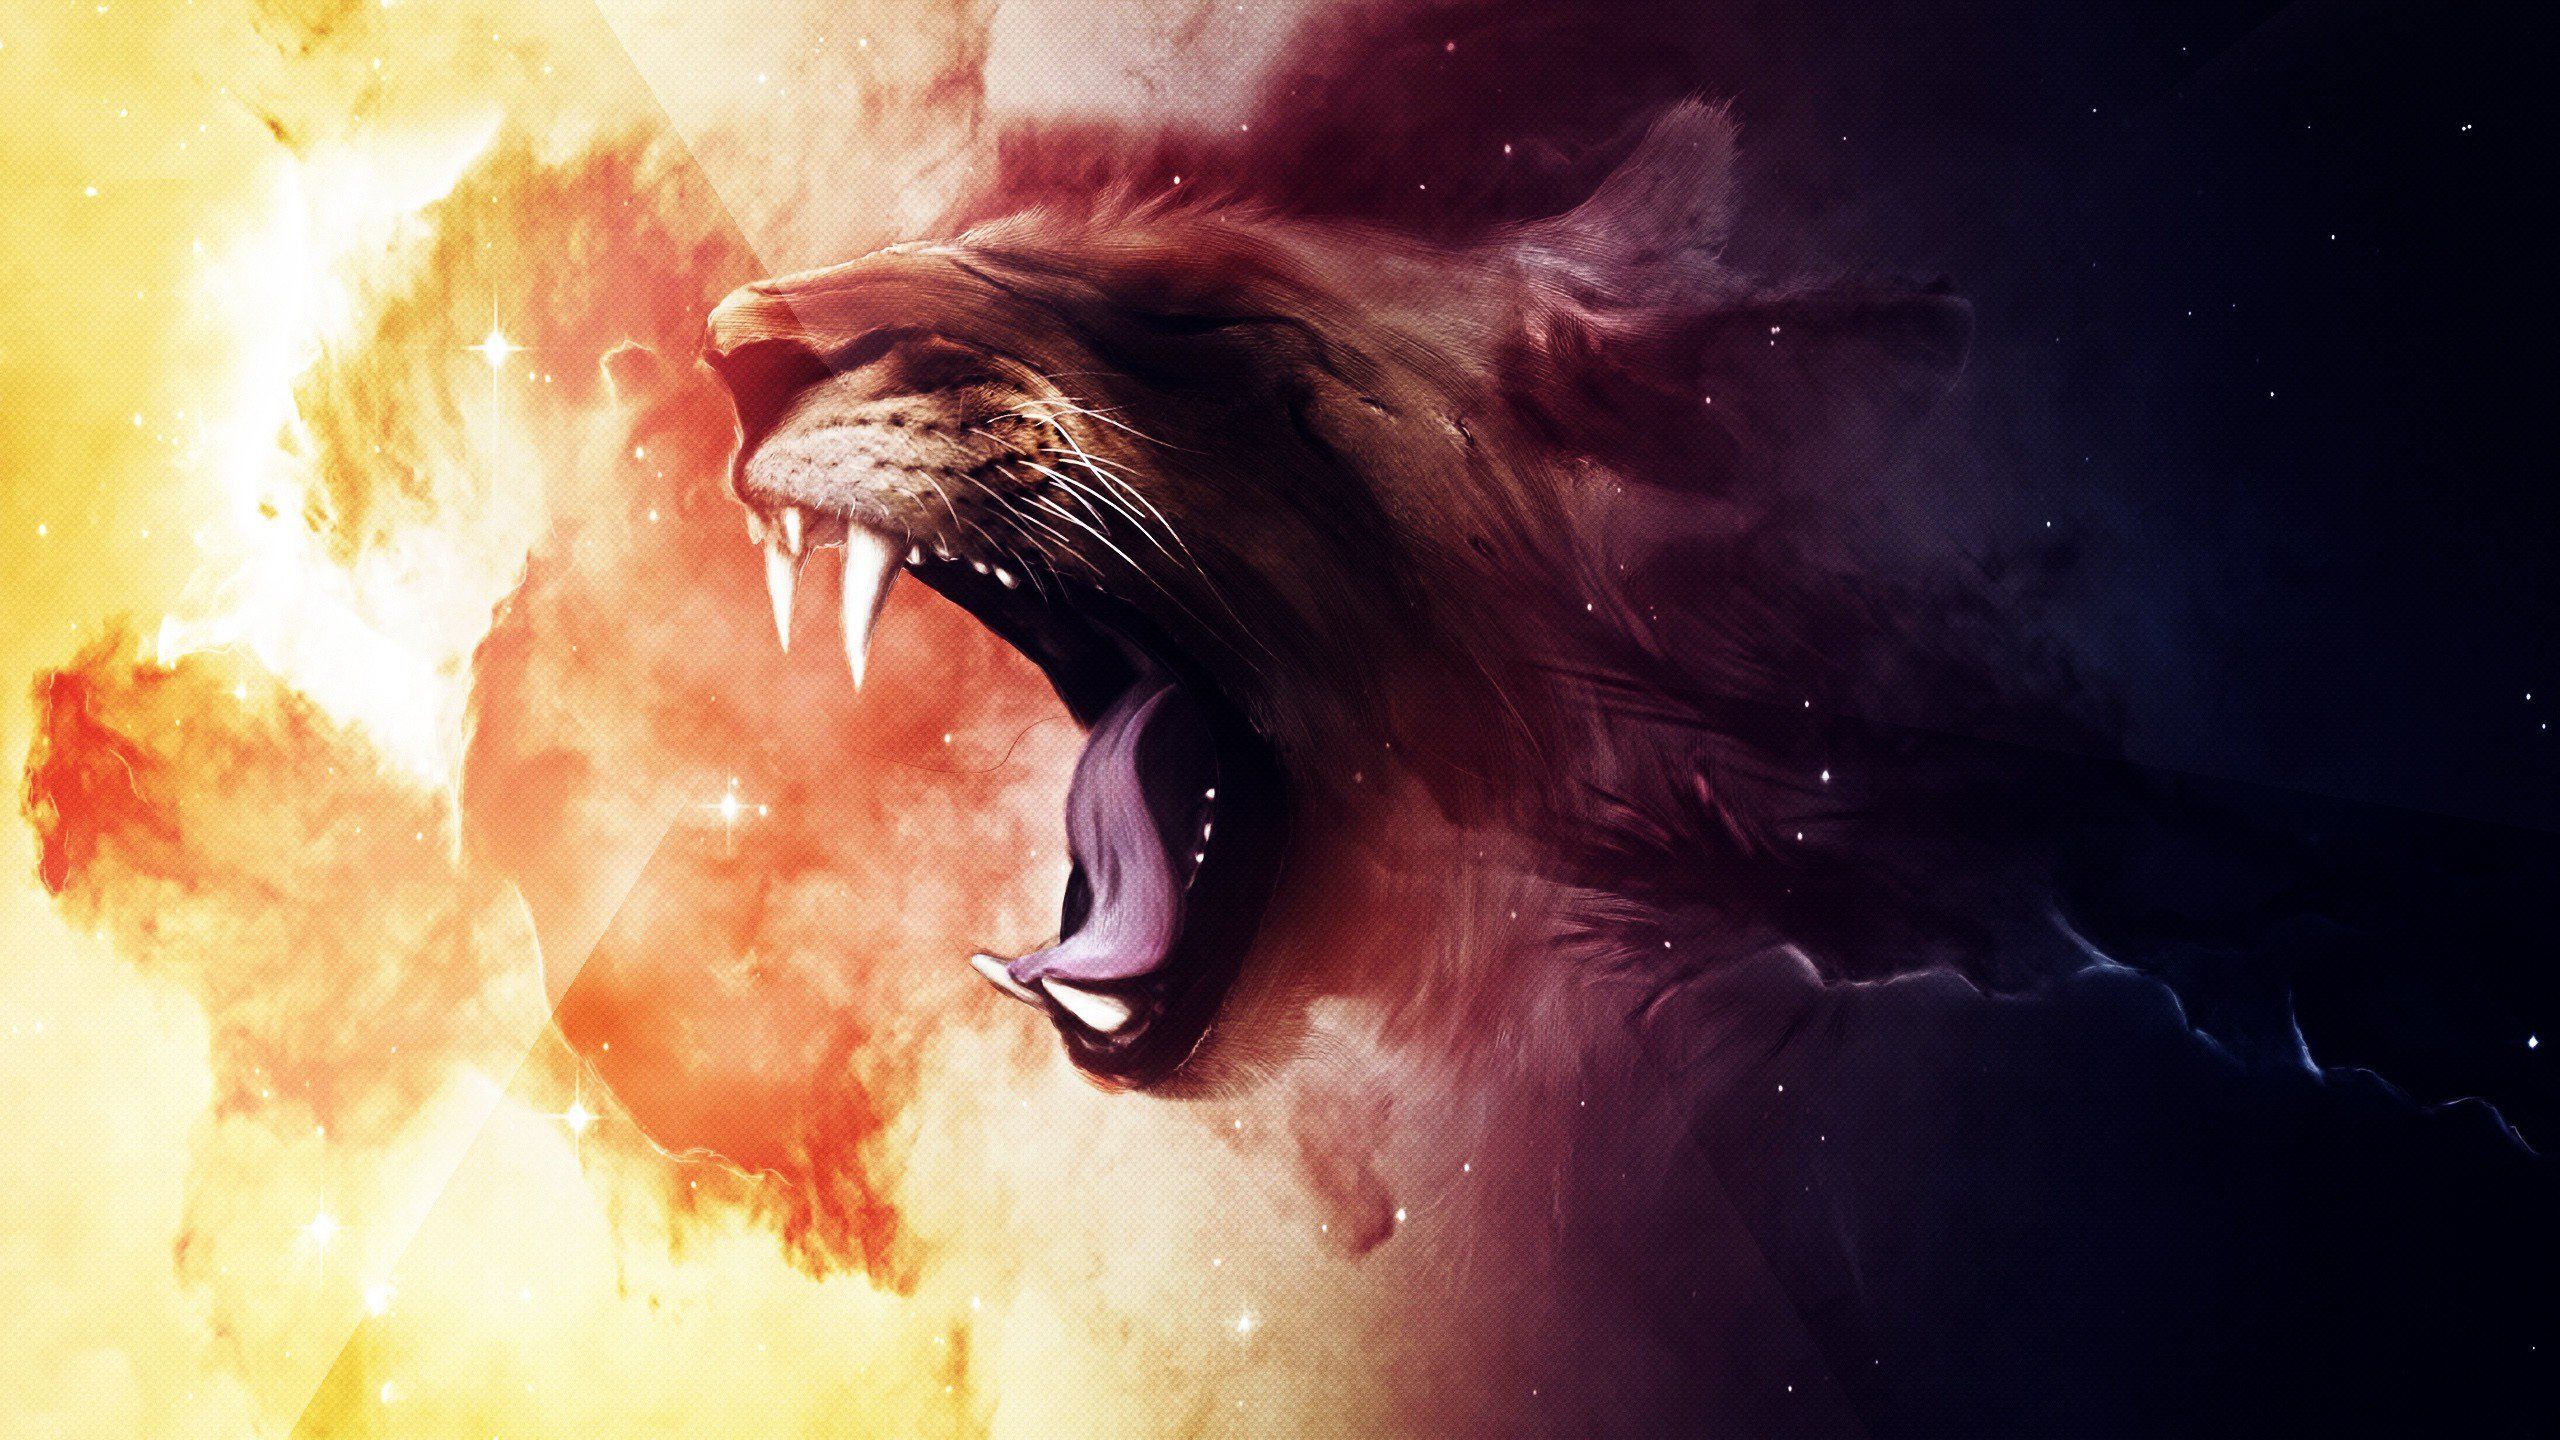 Roaring Lion 1440P Resolution HD 4k Wallpaper, Image, Background, Photo and Picture